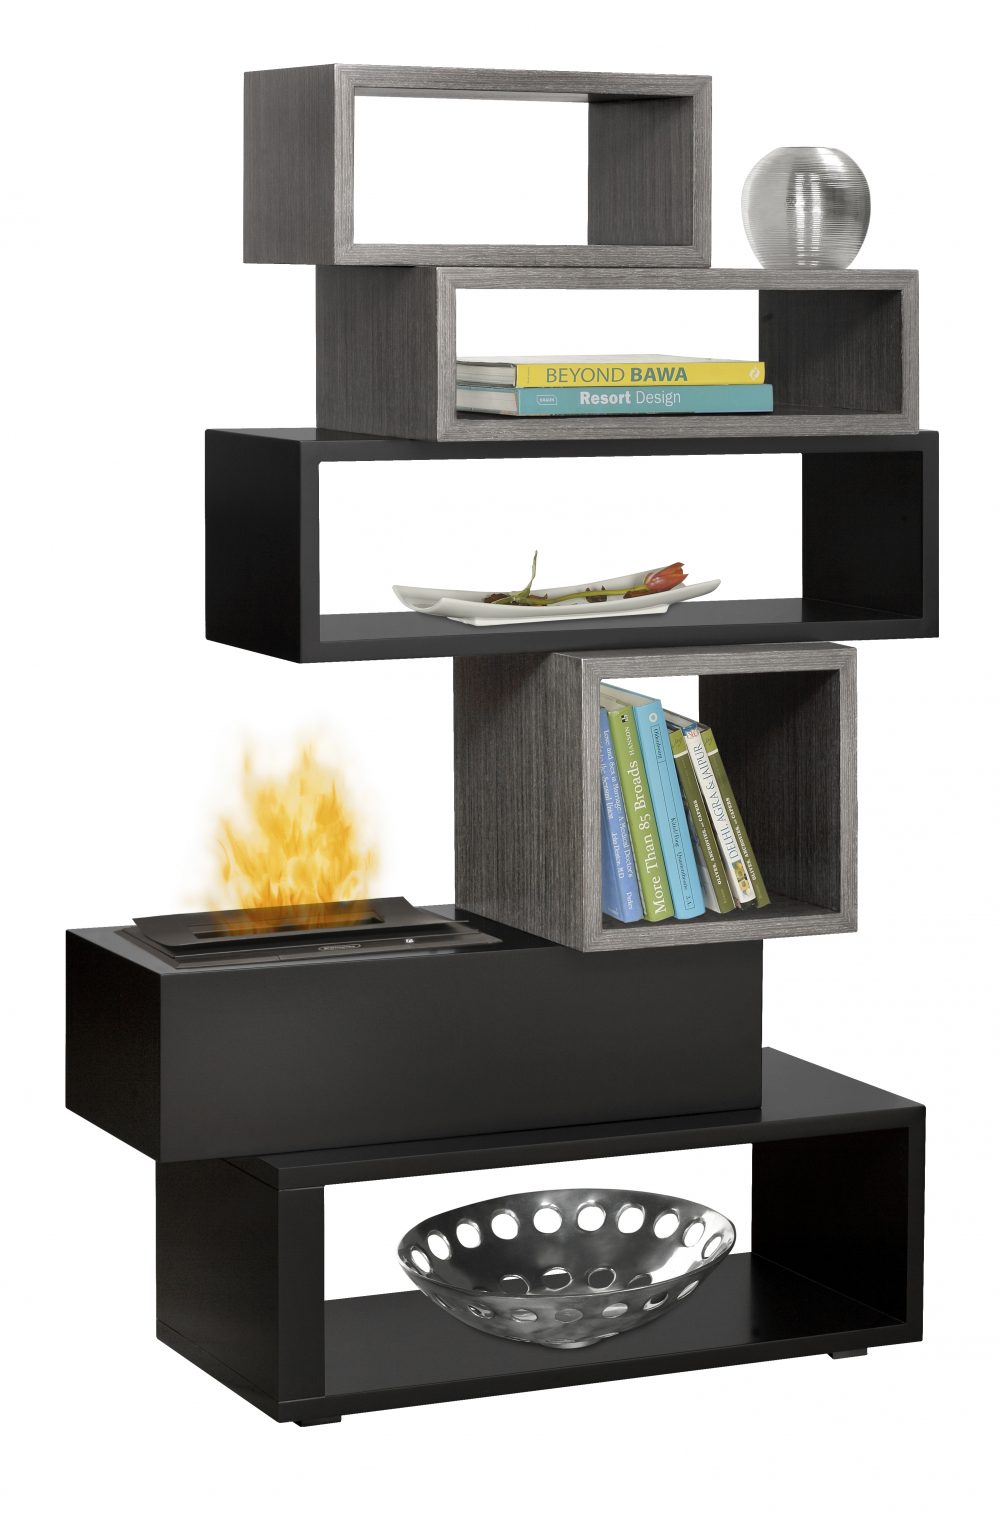 Electric Fireplace with Bookshelf Best Of Dimplex Electric Fireplace Opt Myst Mimico the Fireplace